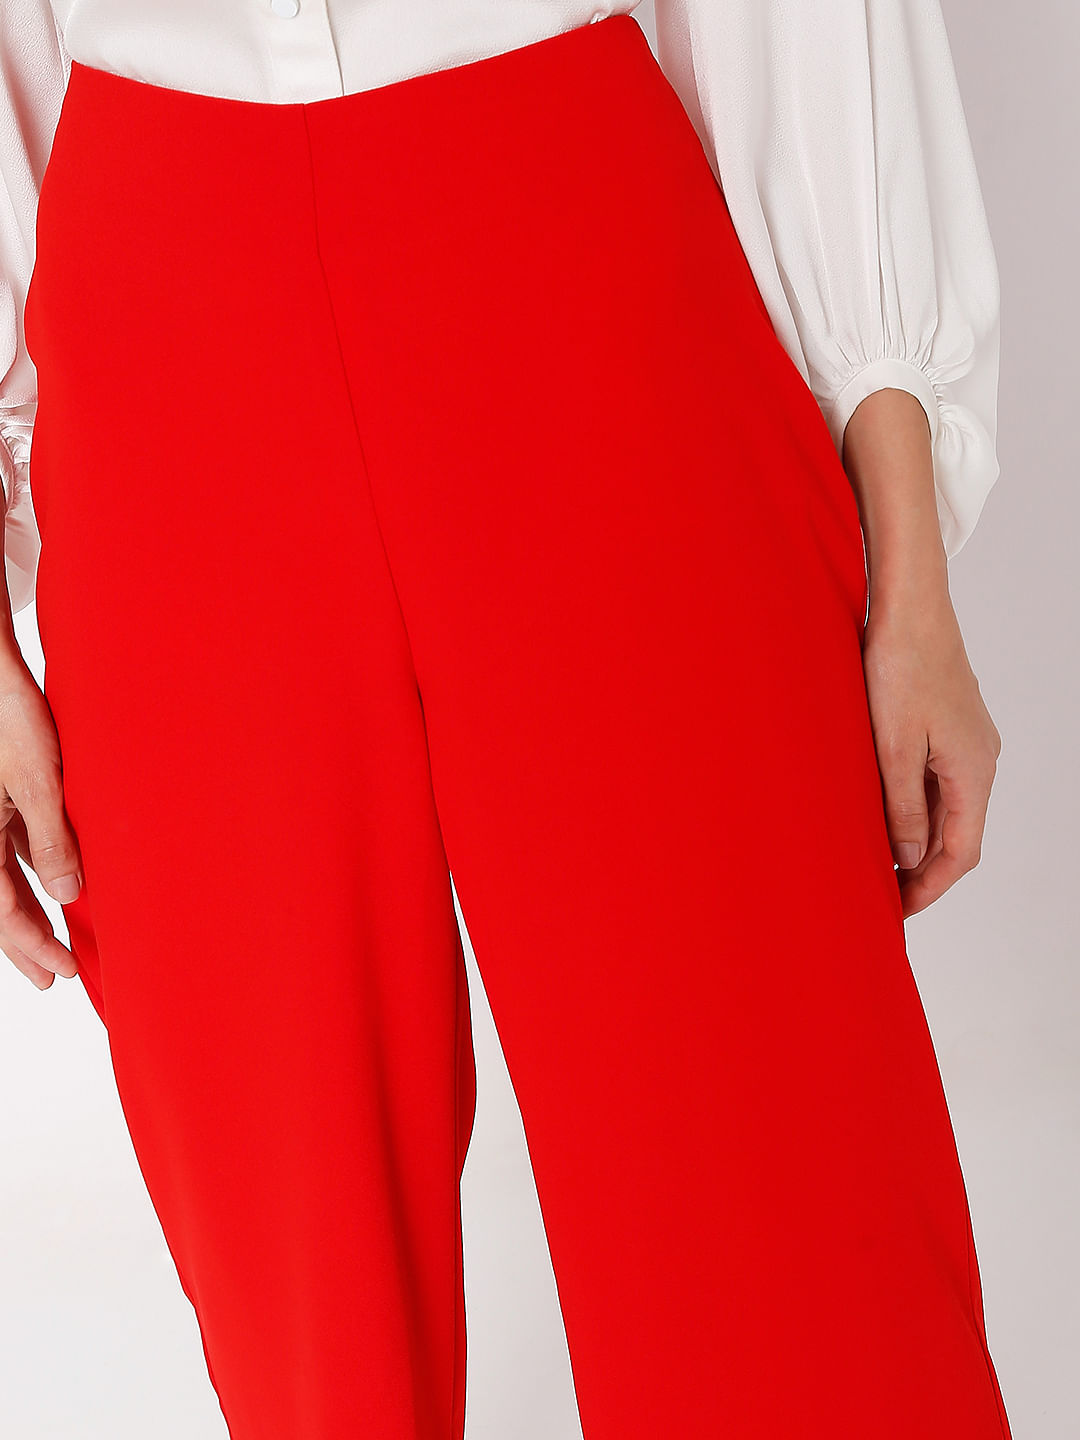 HGFASHION Relaxed Women Red Trousers  Buy HGFASHION Relaxed Women Red  Trousers Online at Best Prices in India  Flipkartcom  VIBRANT CONTEST